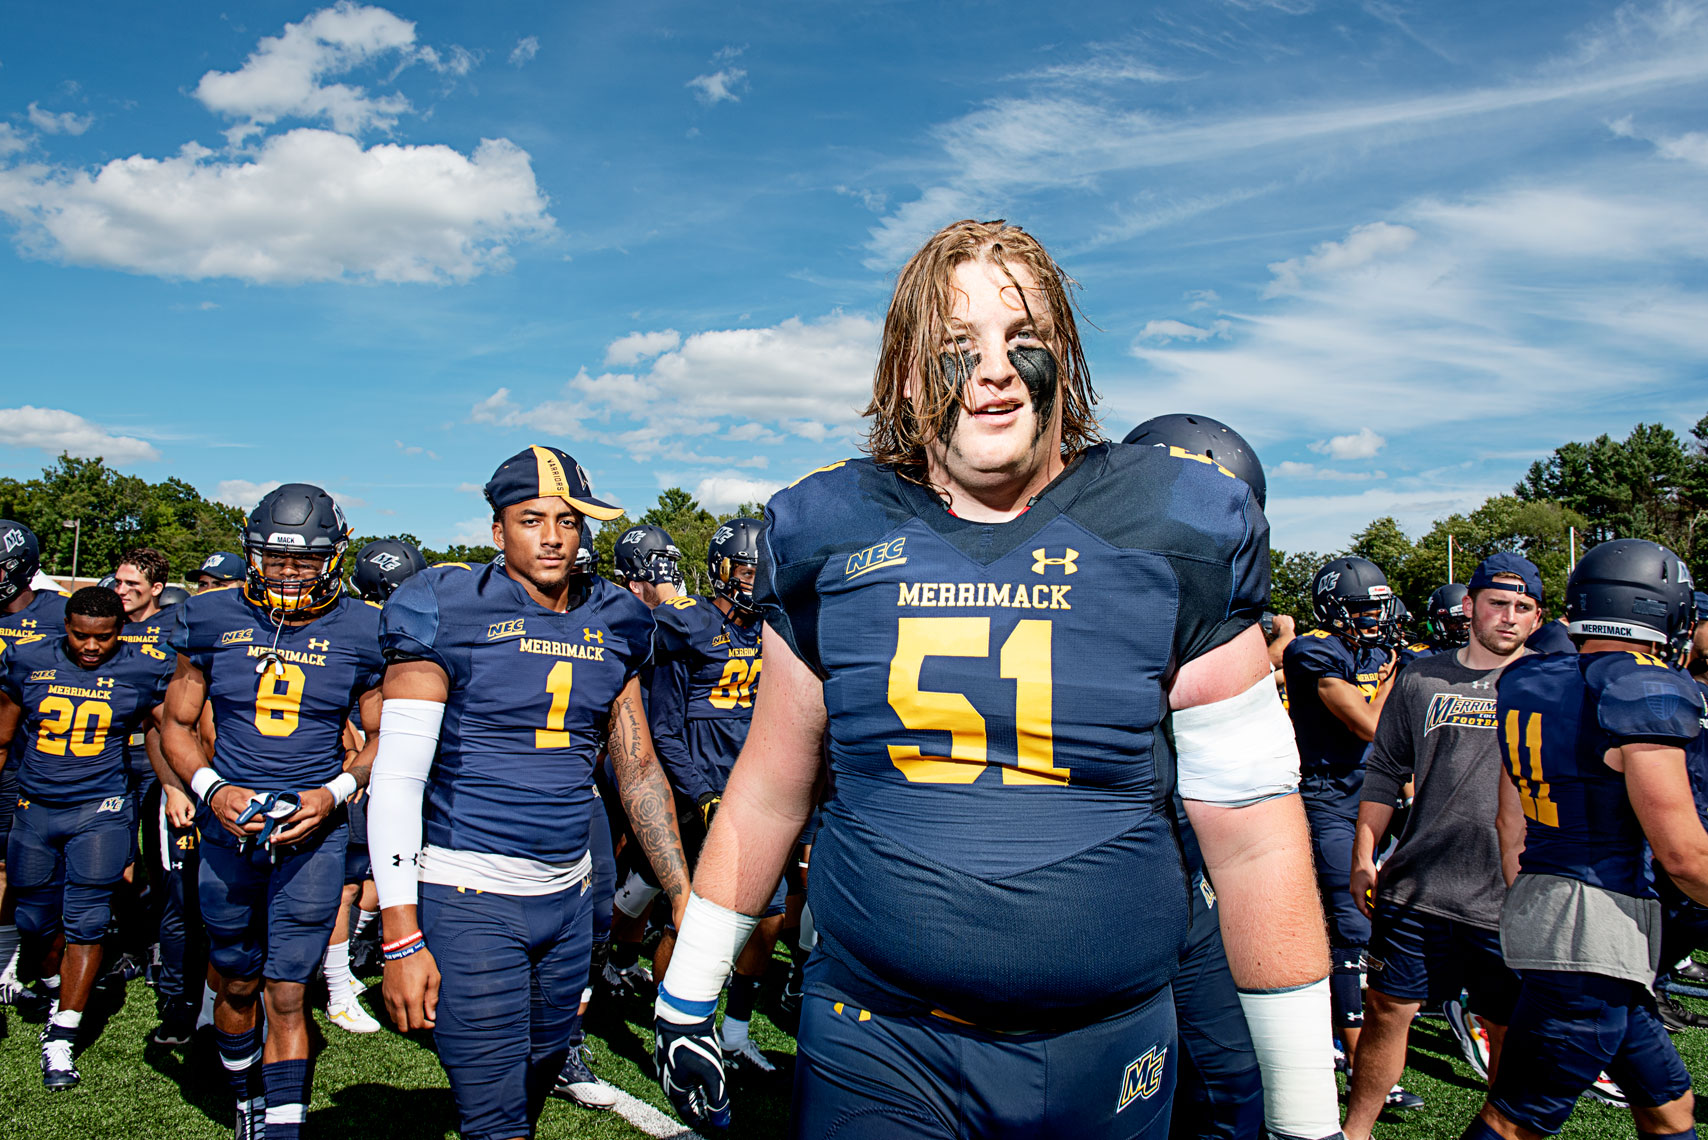 Division One college football at Merrimack College